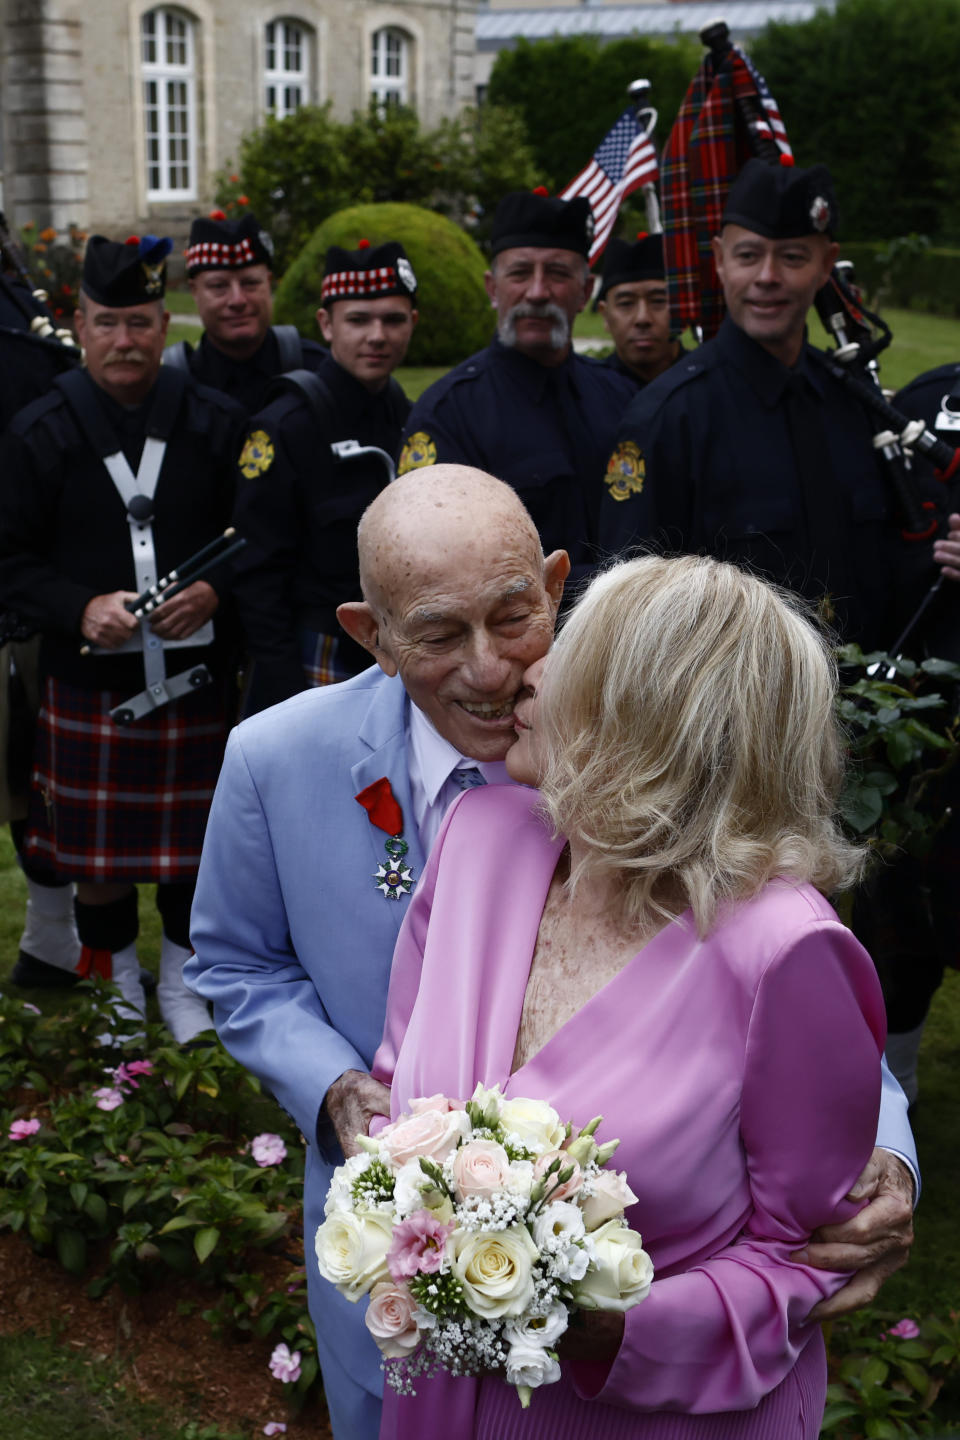 US WWII veteran Harold Terens, 100, left, and Jeanne Swerlin, 96, arrive to celebrate their wedding at the town hall of Carentan-les-Marais, in Normandy, northwestern France, on Saturday, June 8, 2024. Together, the collective age of the bride and groom was nearly 200. But Terens and his sweetheart Jeanne Swerlin proved that love is eternal as they tied the knot Saturday inland of the D-Day beaches in Normandy, France. (AP Photo/Jeremias Gonzalez)